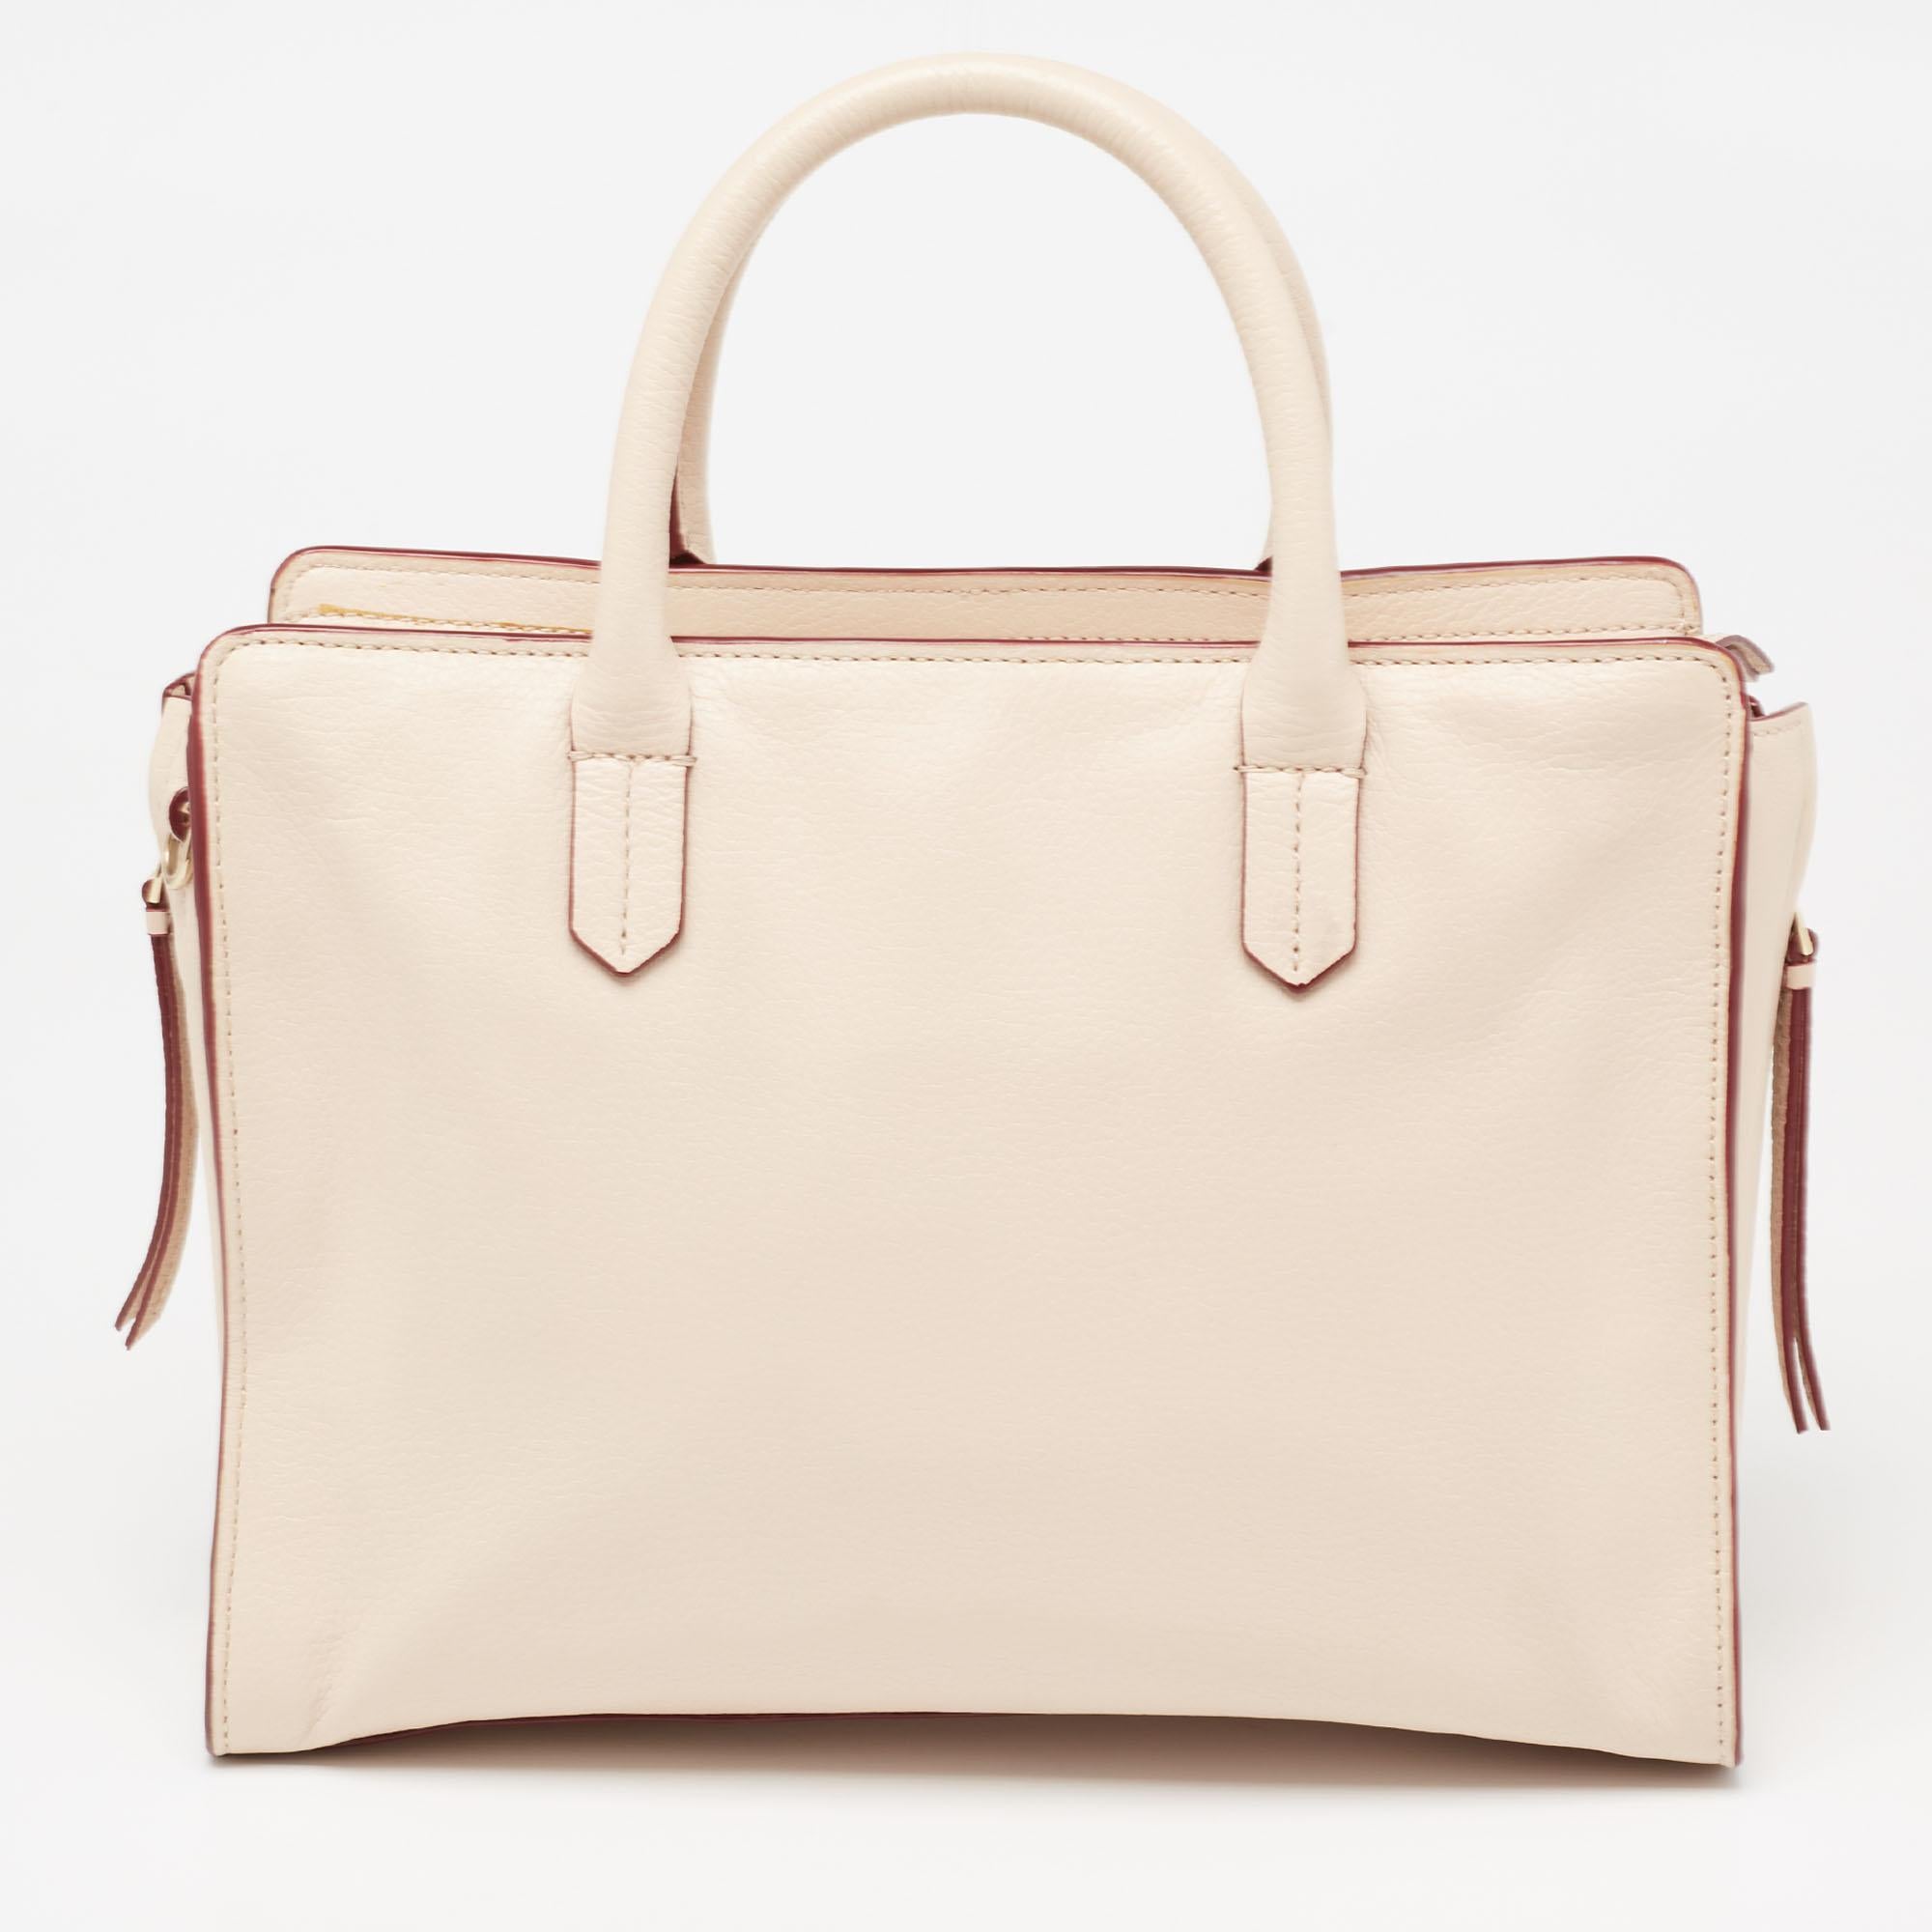 This timeless Robinson tote is from Tory Burch. It carries a beige-hued exterior made of quality leather and it has been equipped with two top handles, a shoulder strap, and a spacious fabric interior. The tote is ideal for everyday use.

Includes: